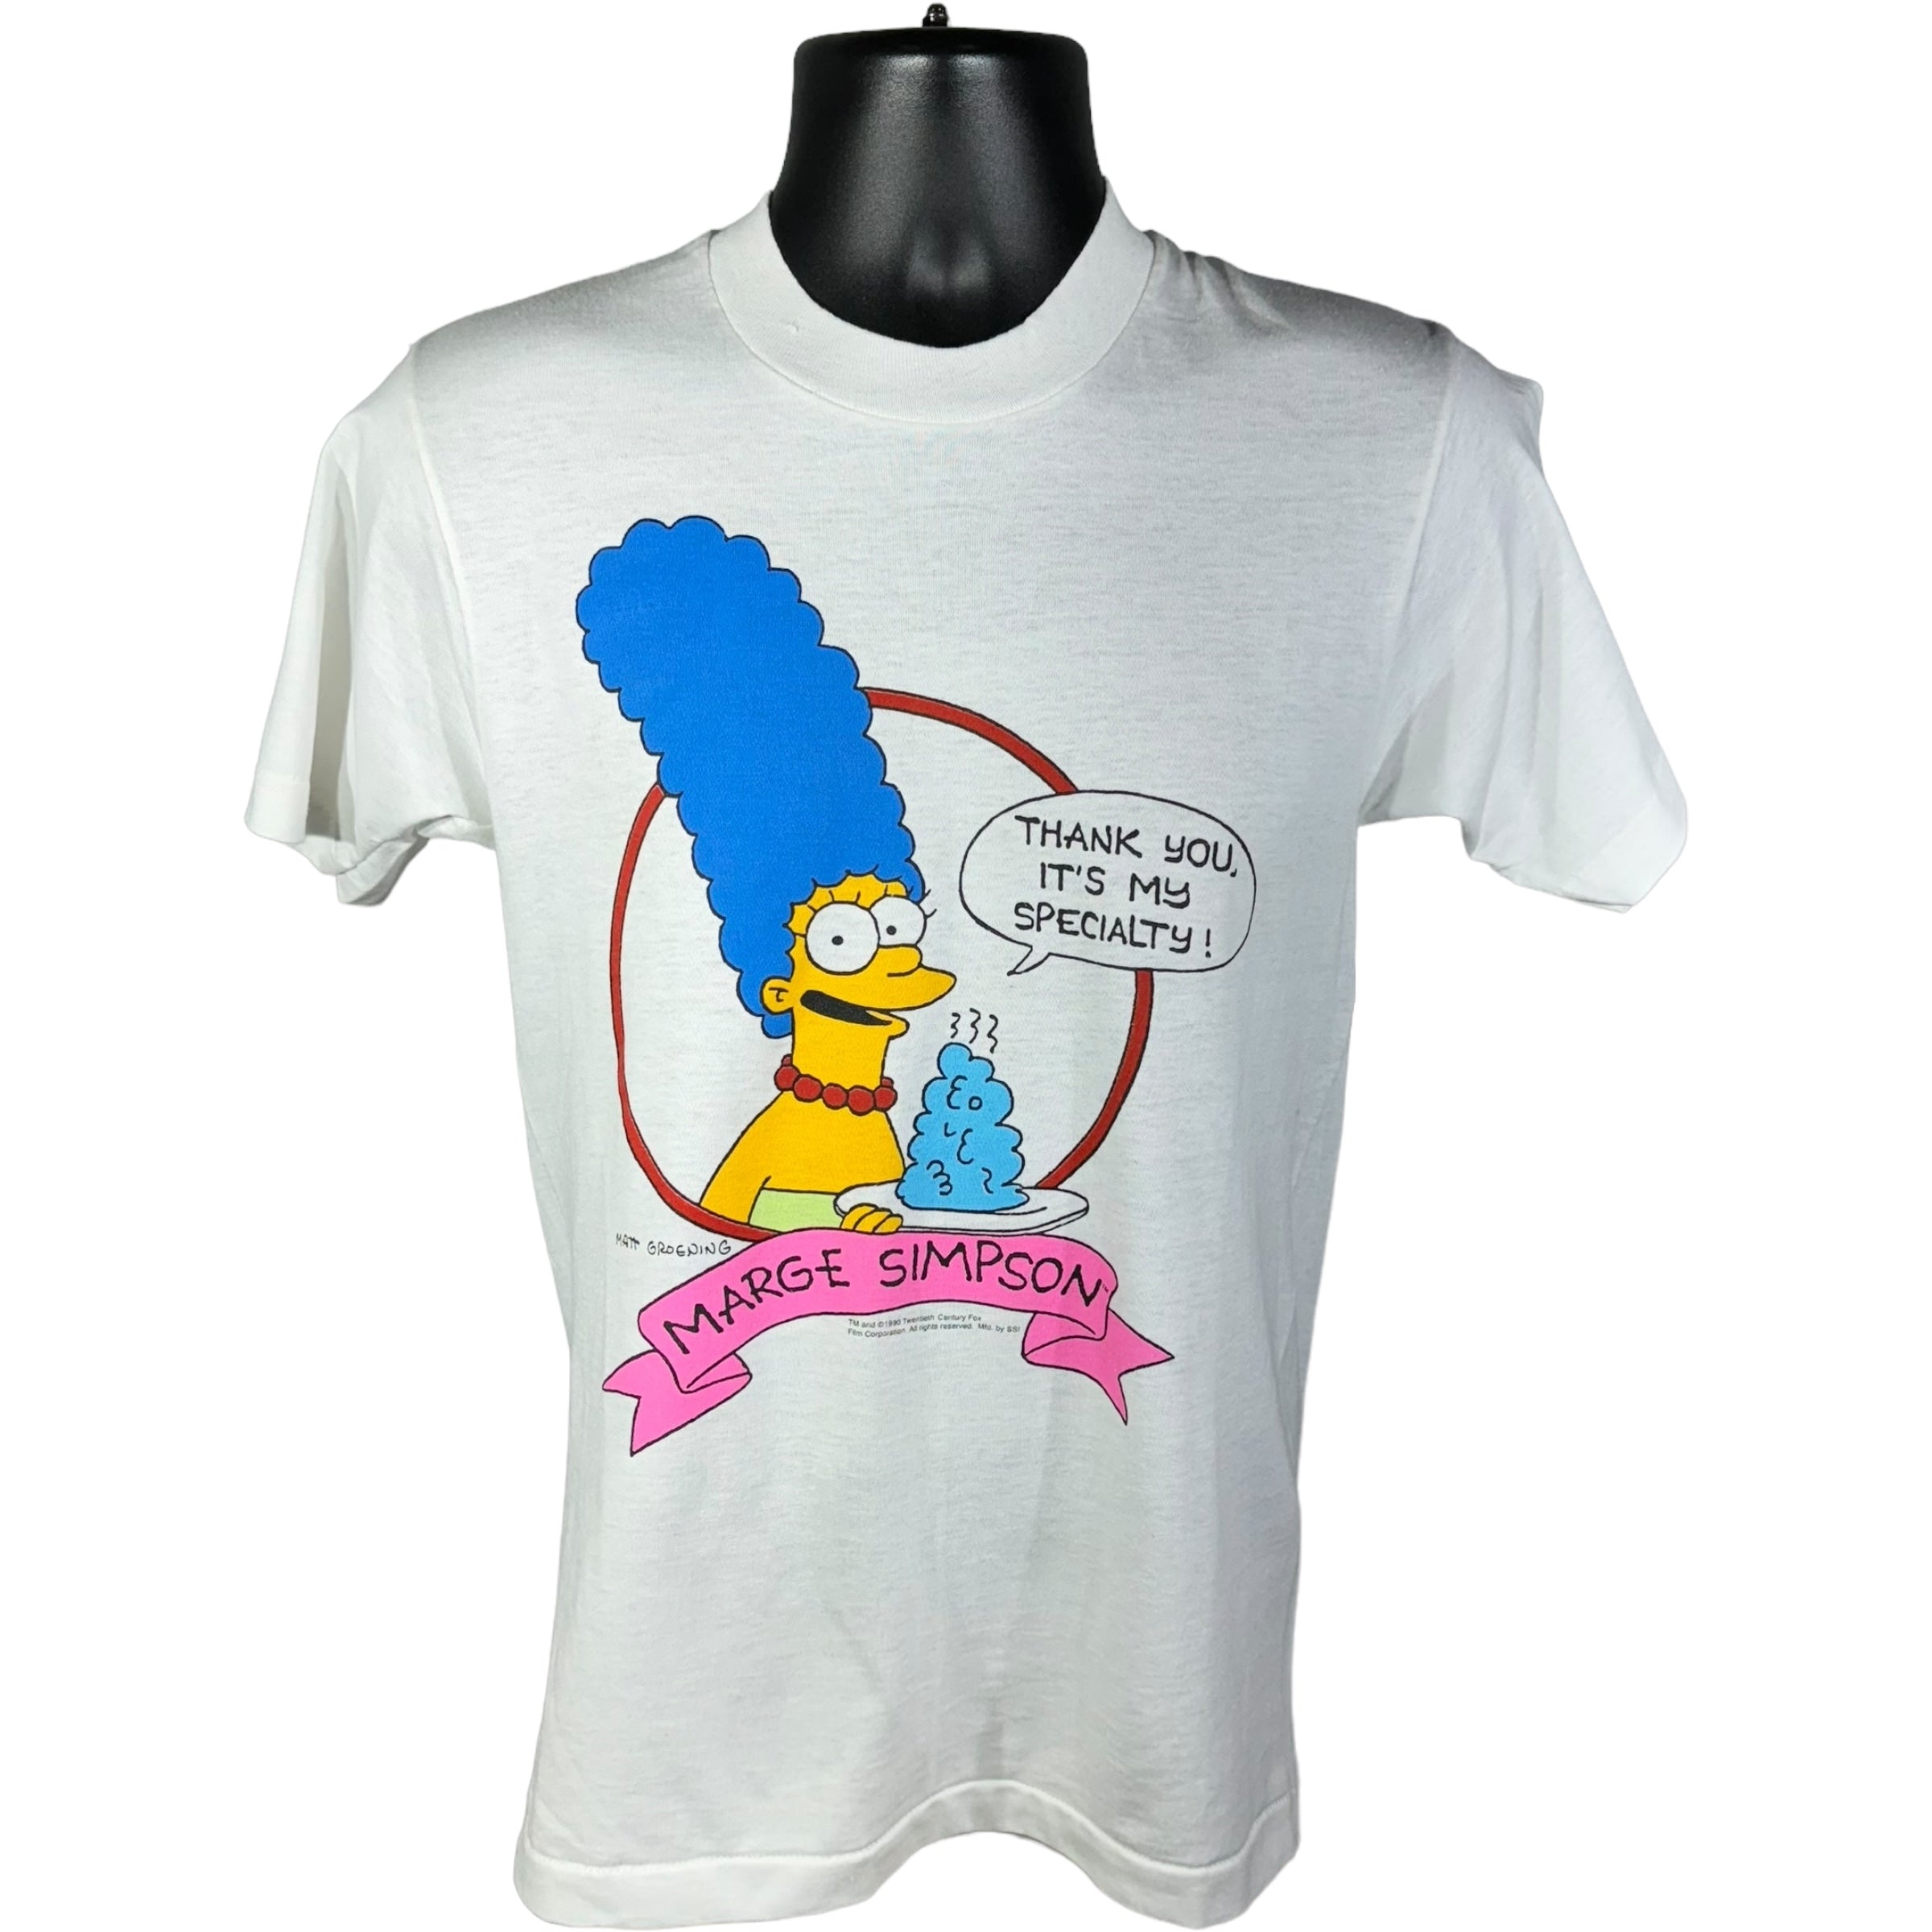 Vintage Marge Simpson "Thank You It's My Specialty" Tee 1990